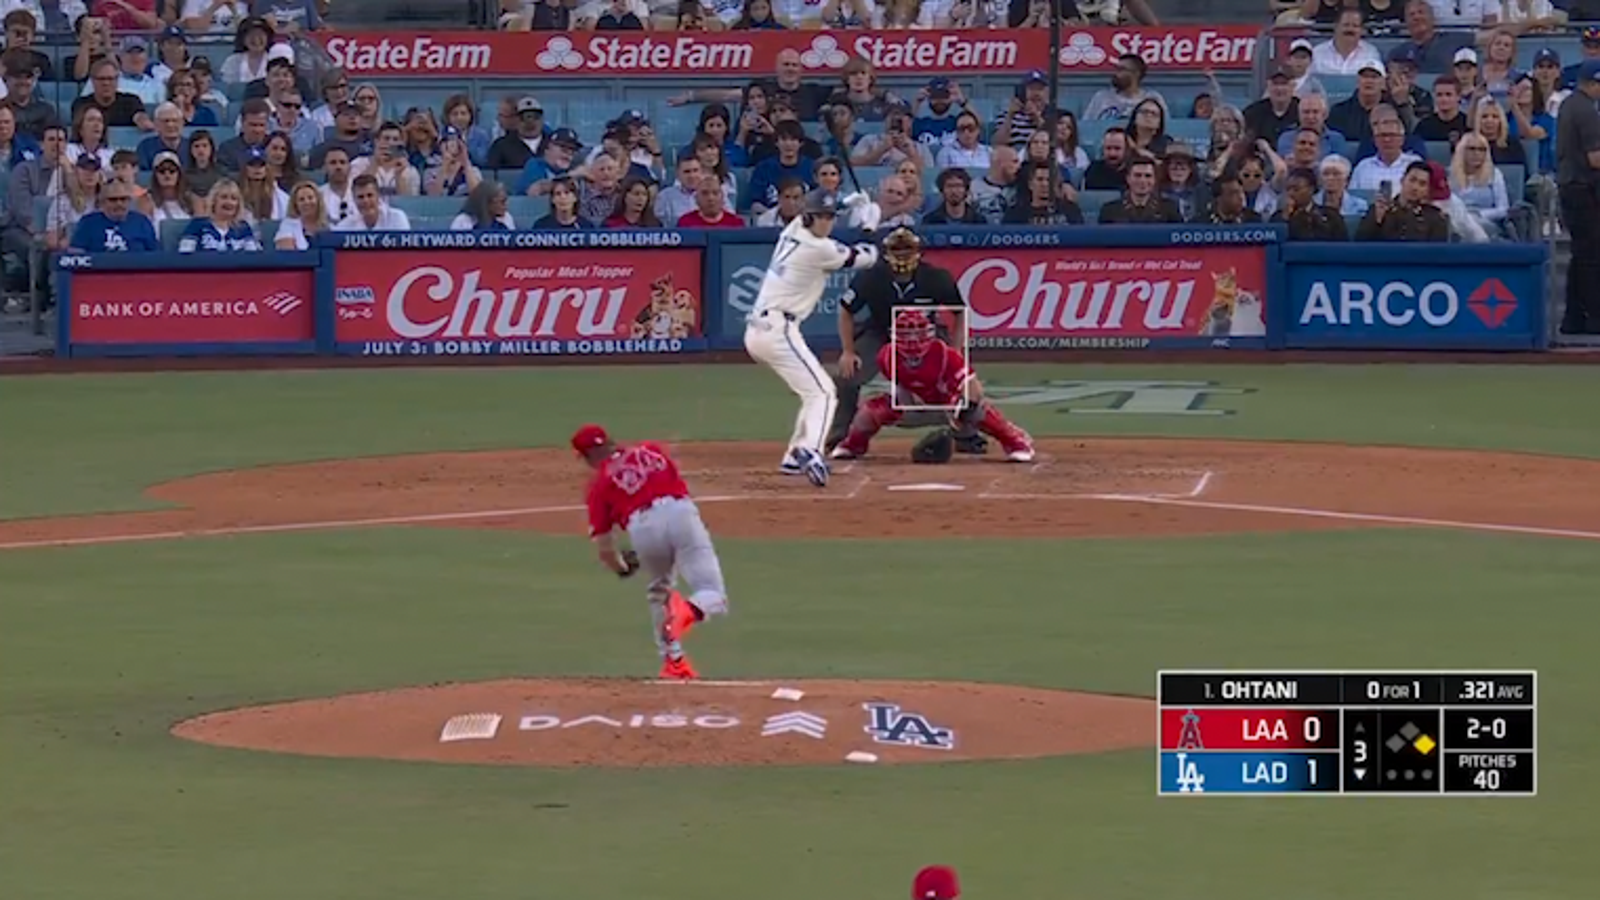 Shohei Ohtani slams a 459-foot home run to extend the Dodgers' lead over the Angels